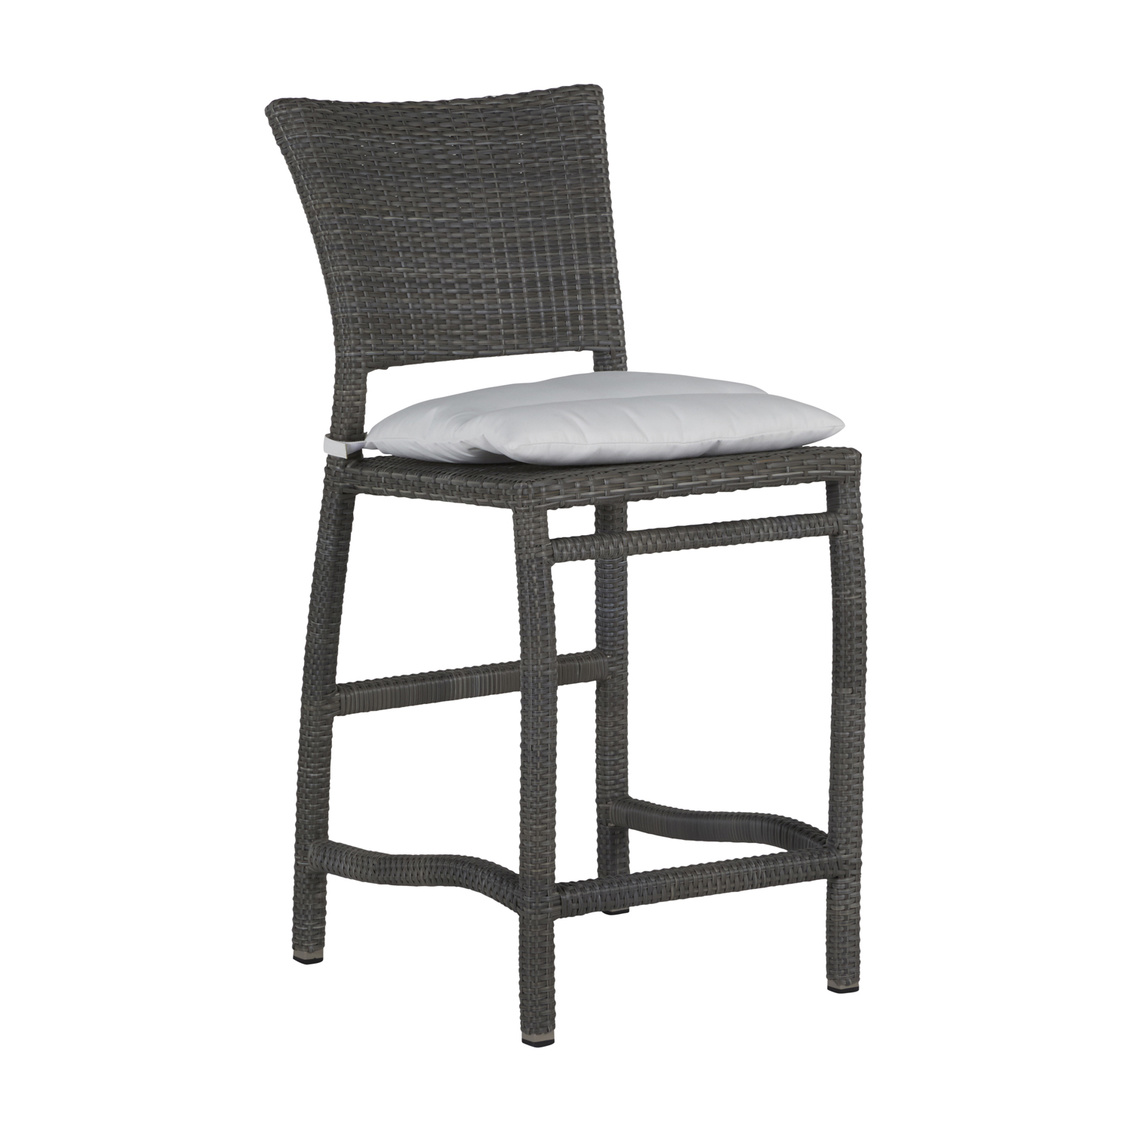 24 inch skye counter stool in slate grey – frame only product image